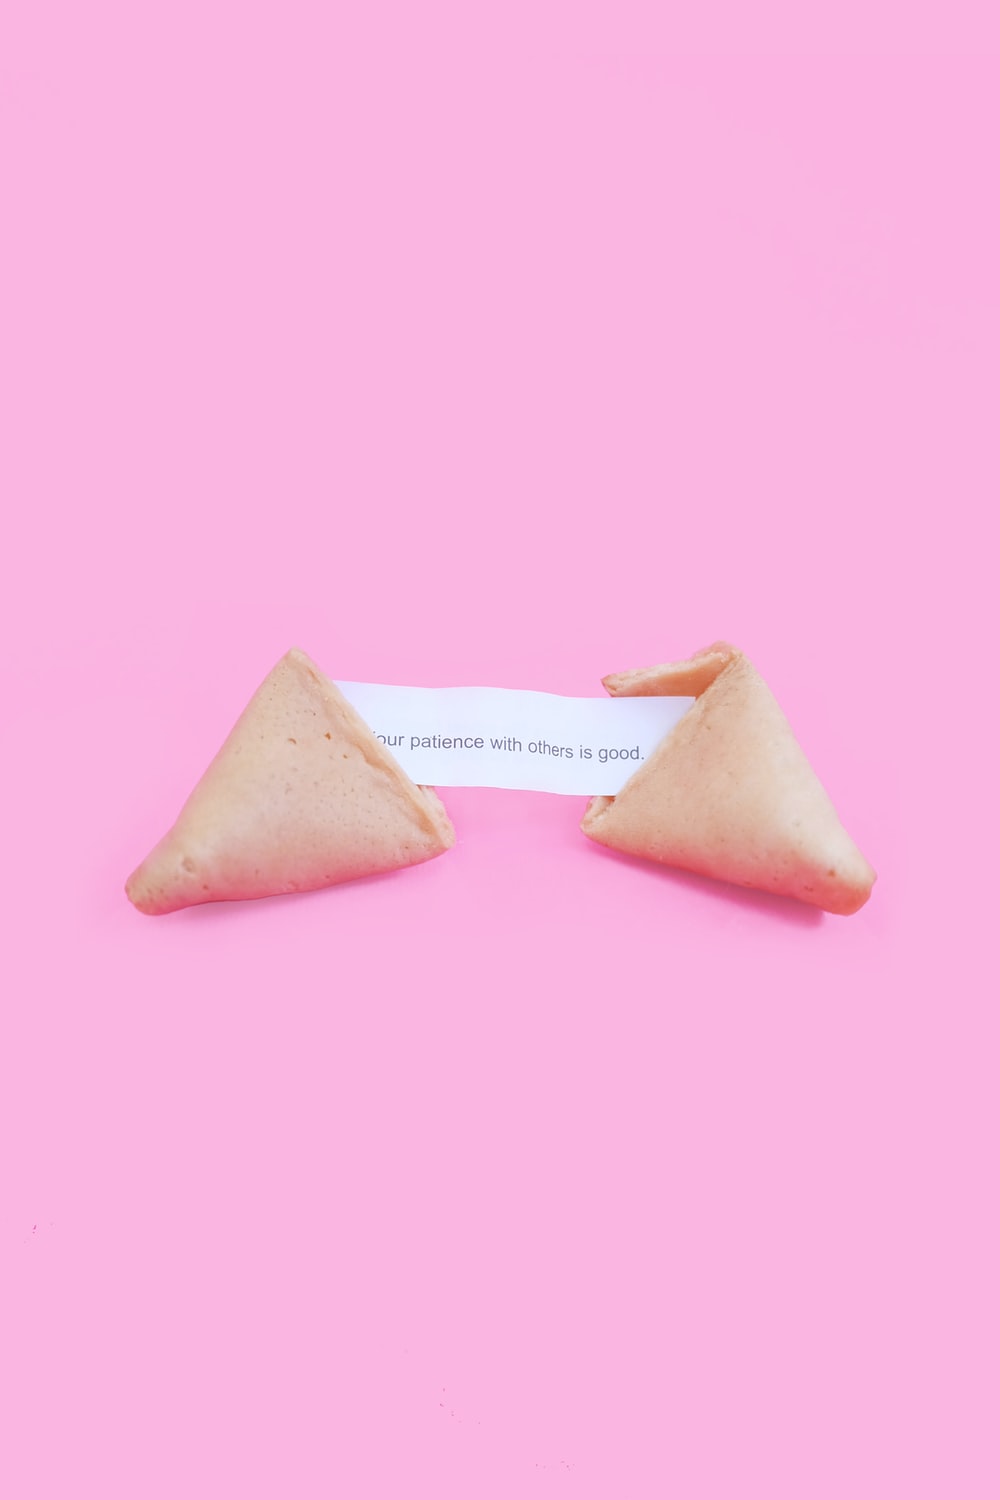 Fortune Cookie Picture. Download Free Image